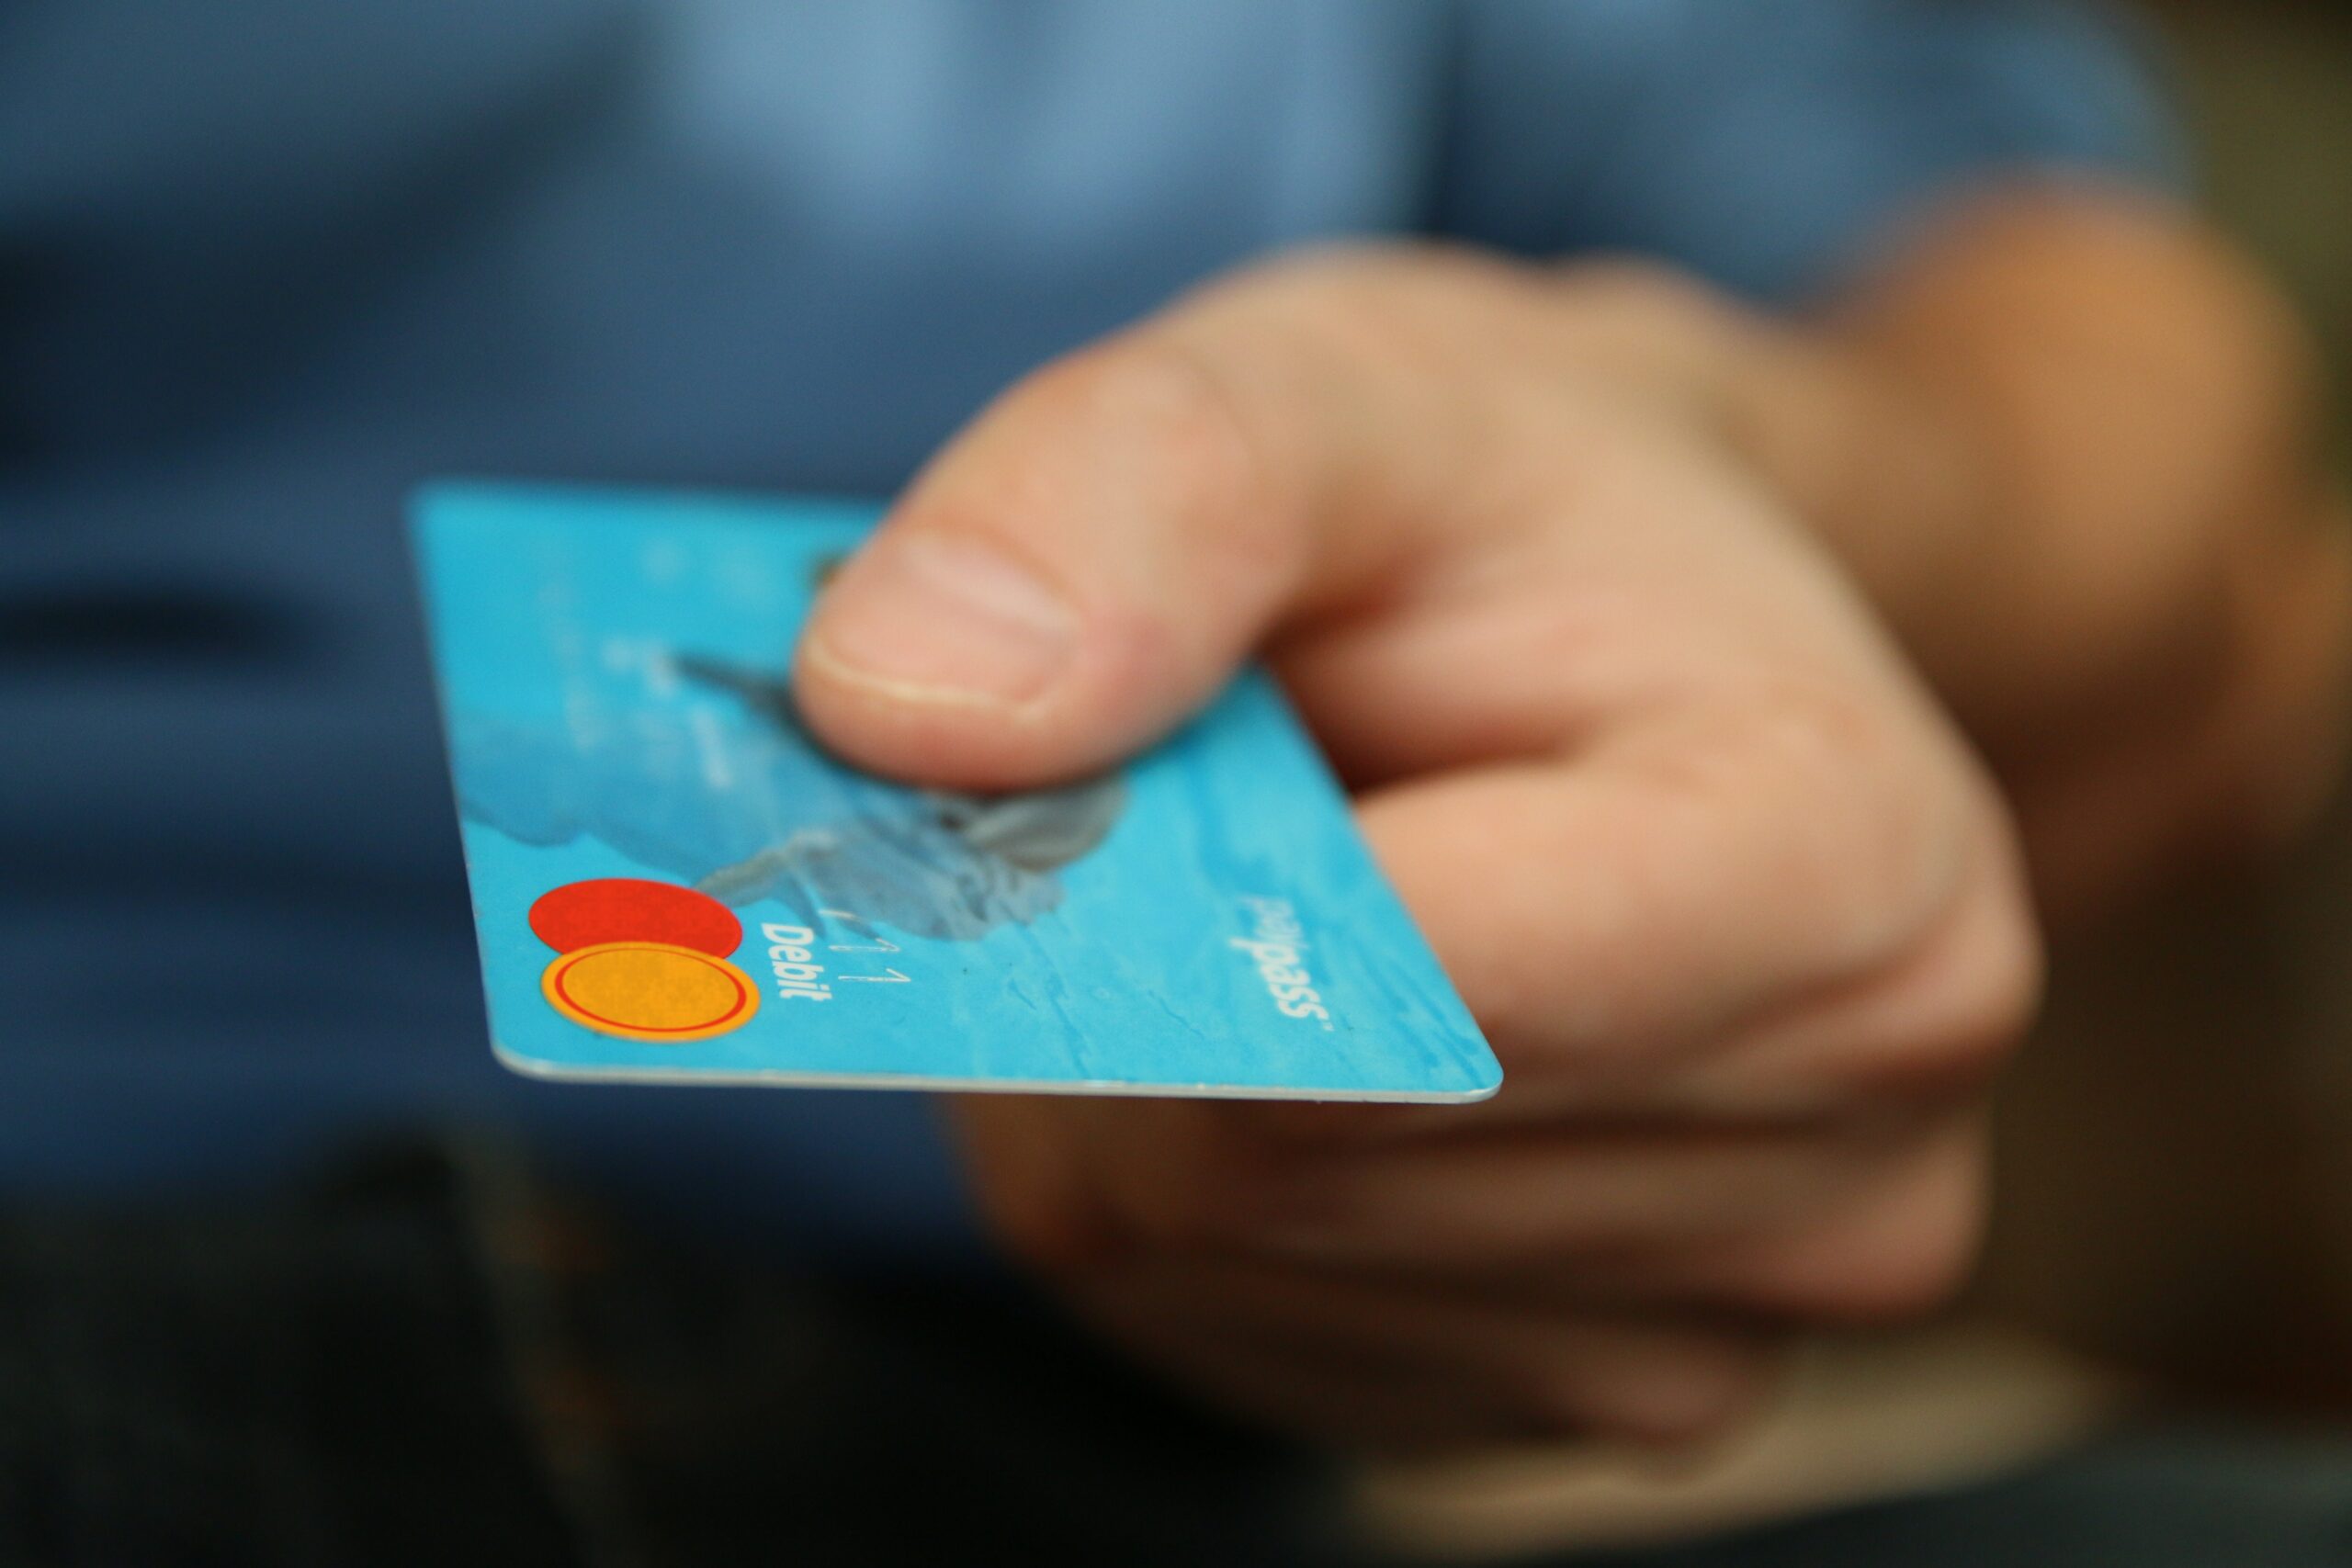 a person holding a blue credit card